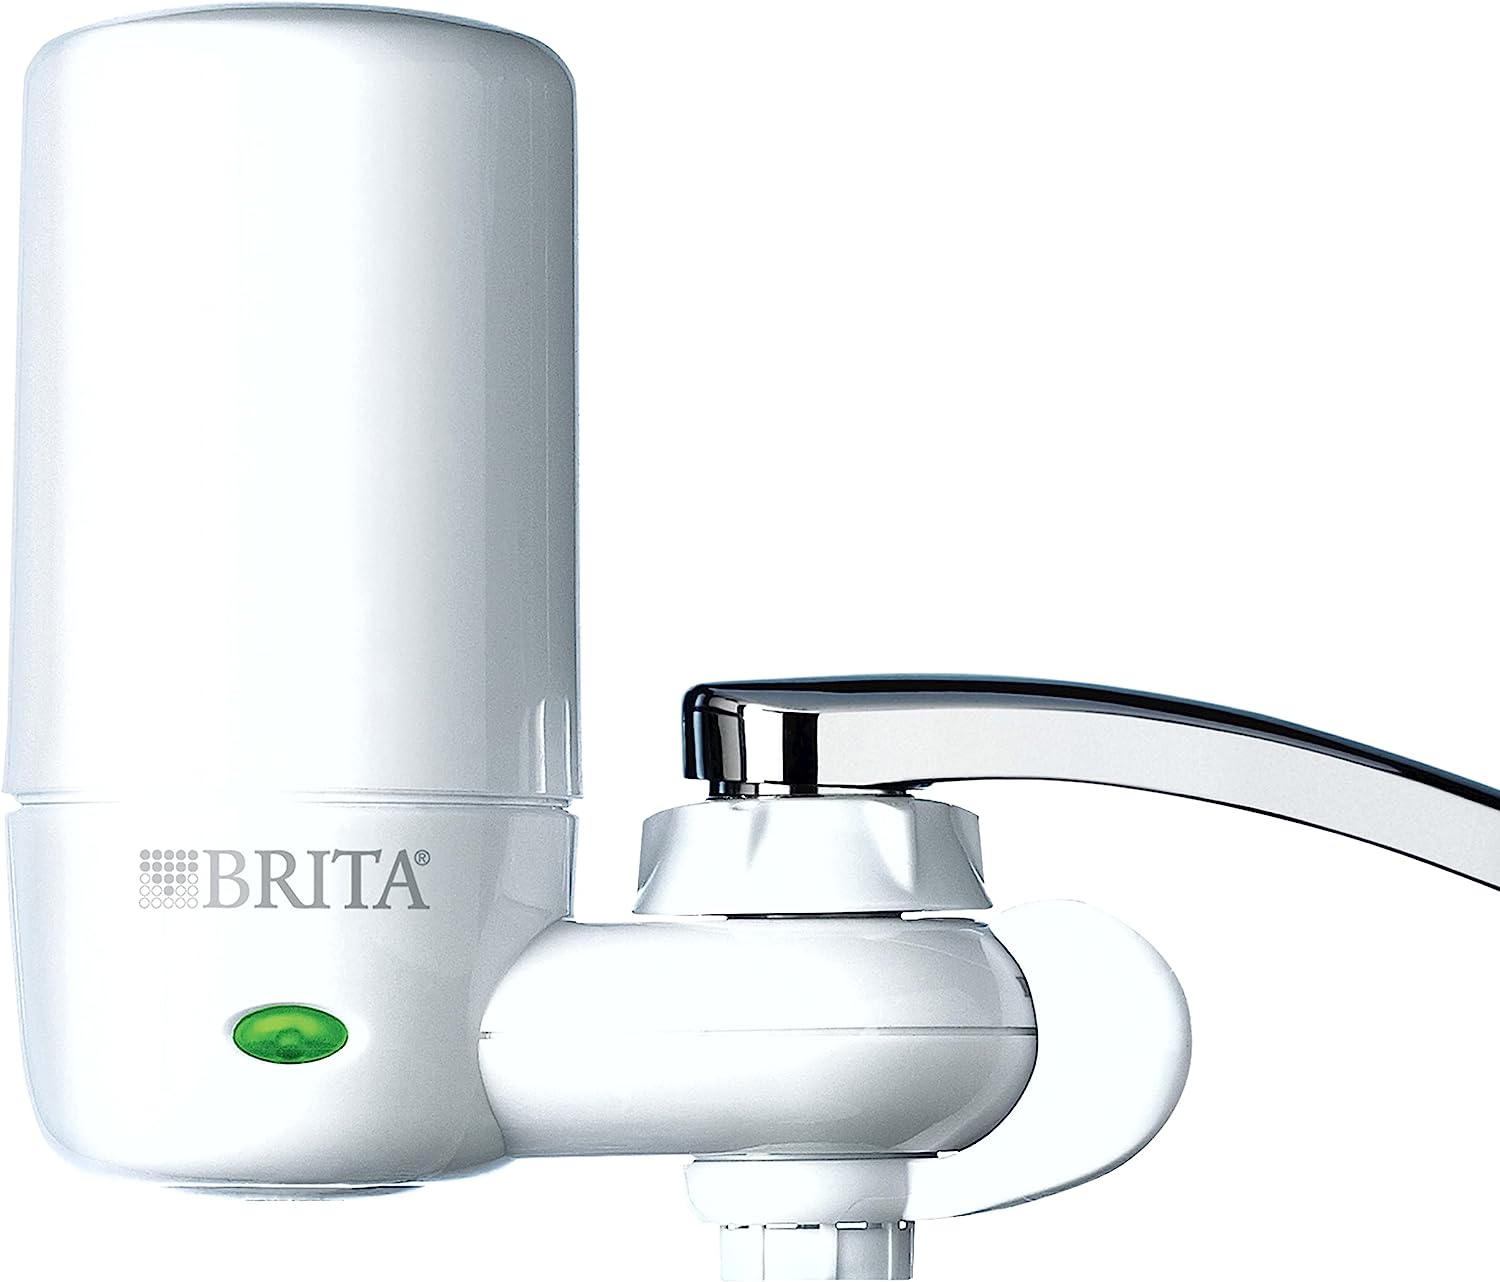 Brita Water Filter for Sink, Complete Faucet Mount [...]